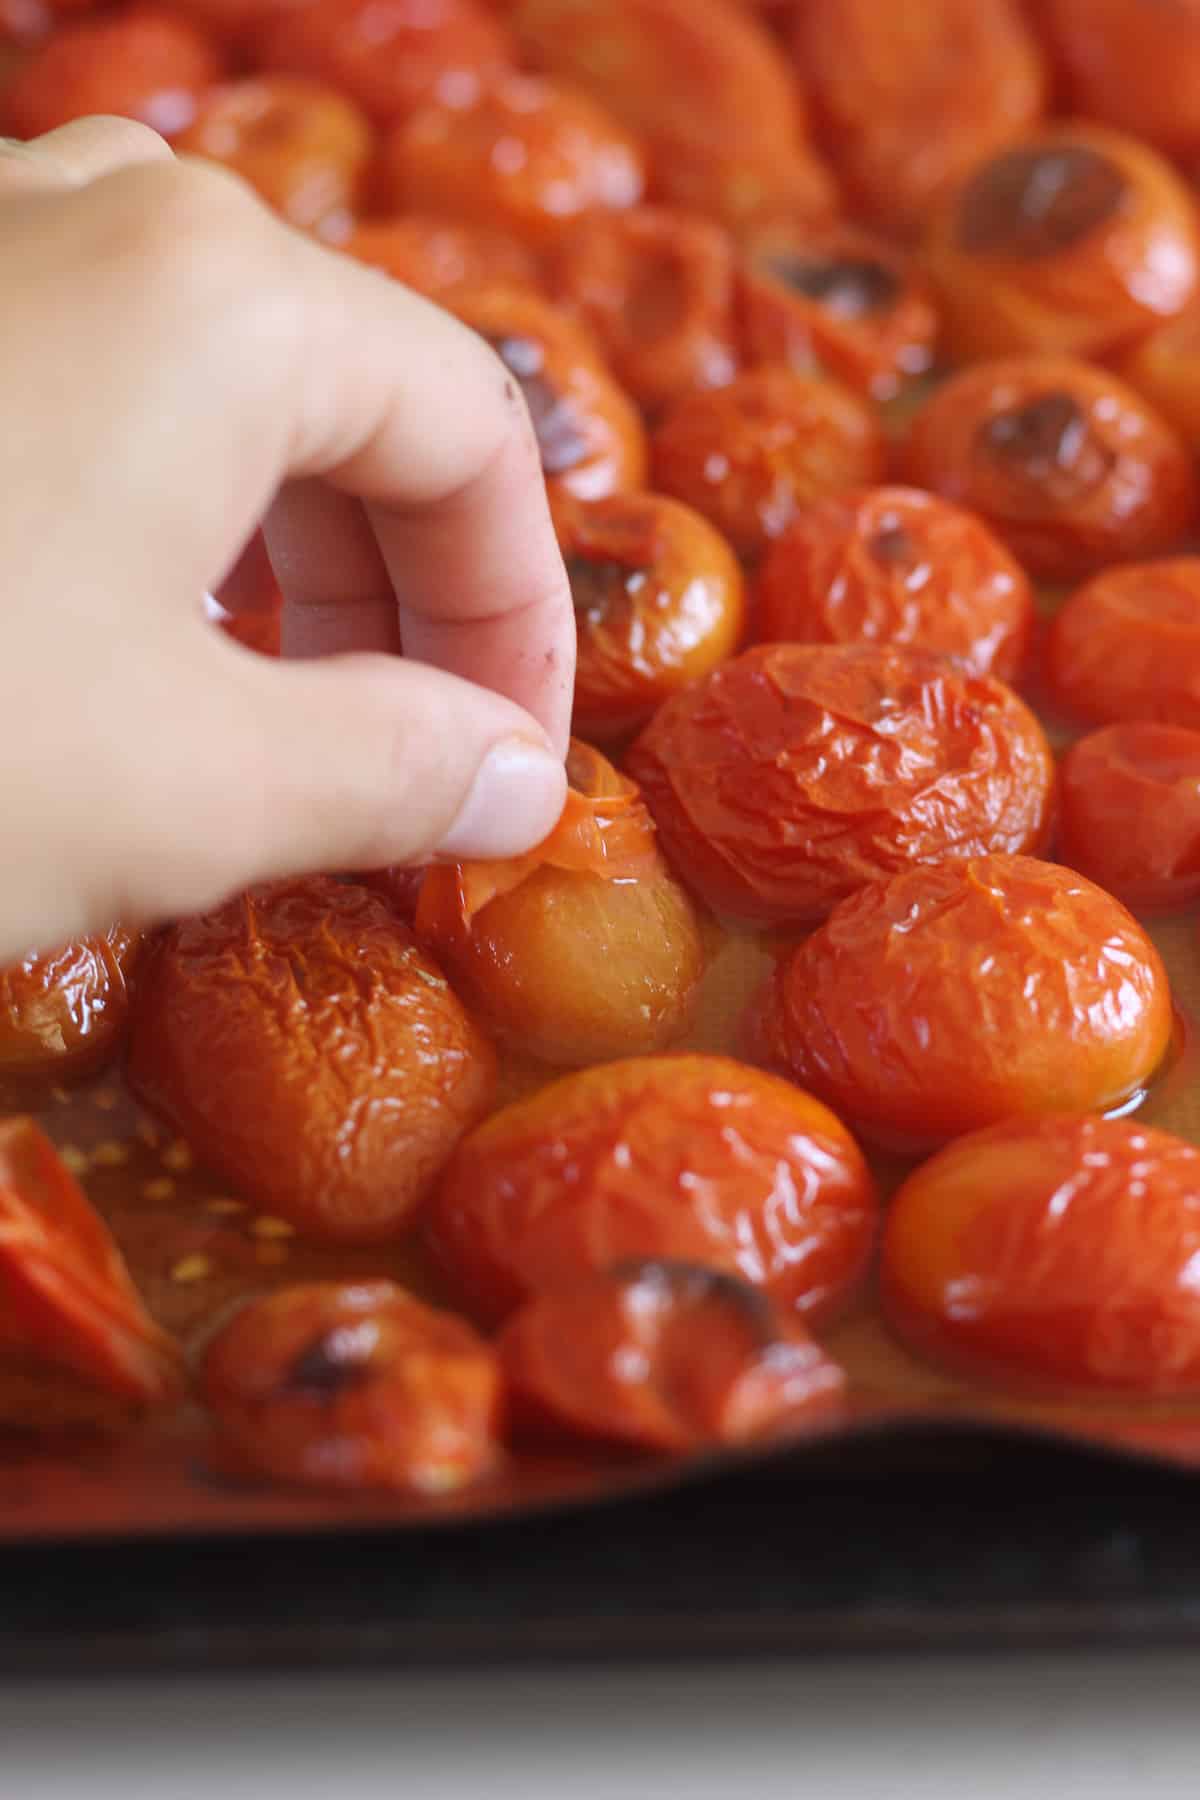 Hand peeling skins off grilled tomatoes